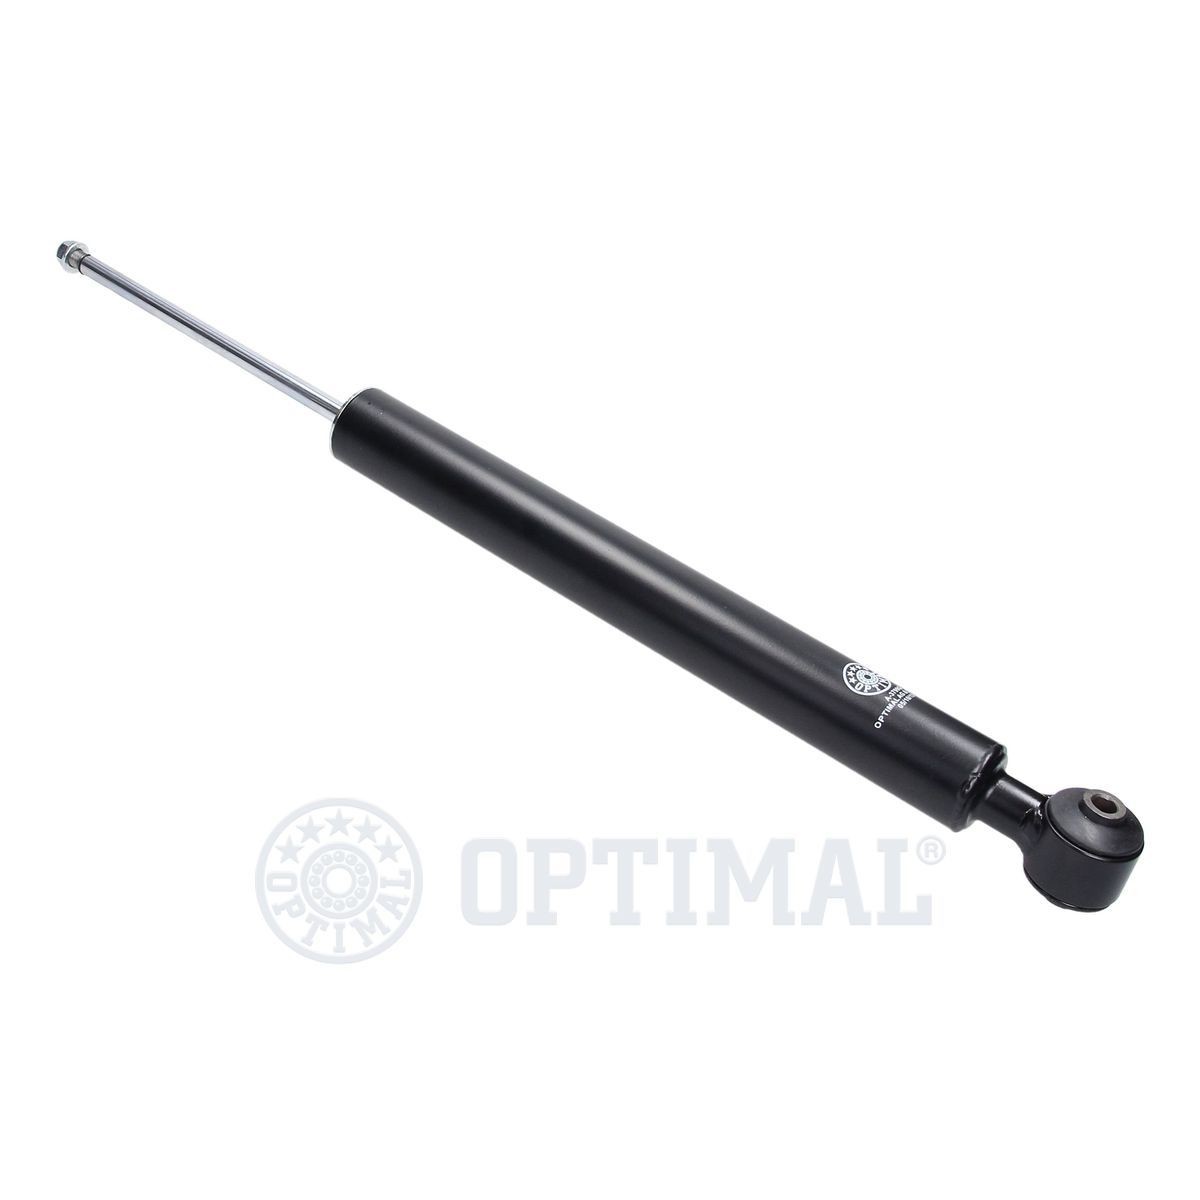 OPTIMAL A-3799G Shock absorber Rear Axle Left, Rear Axle Right, Gas Pressure, Monotube, Telescopic Shock Absorber, Bottom eye, Top pin, M10x1